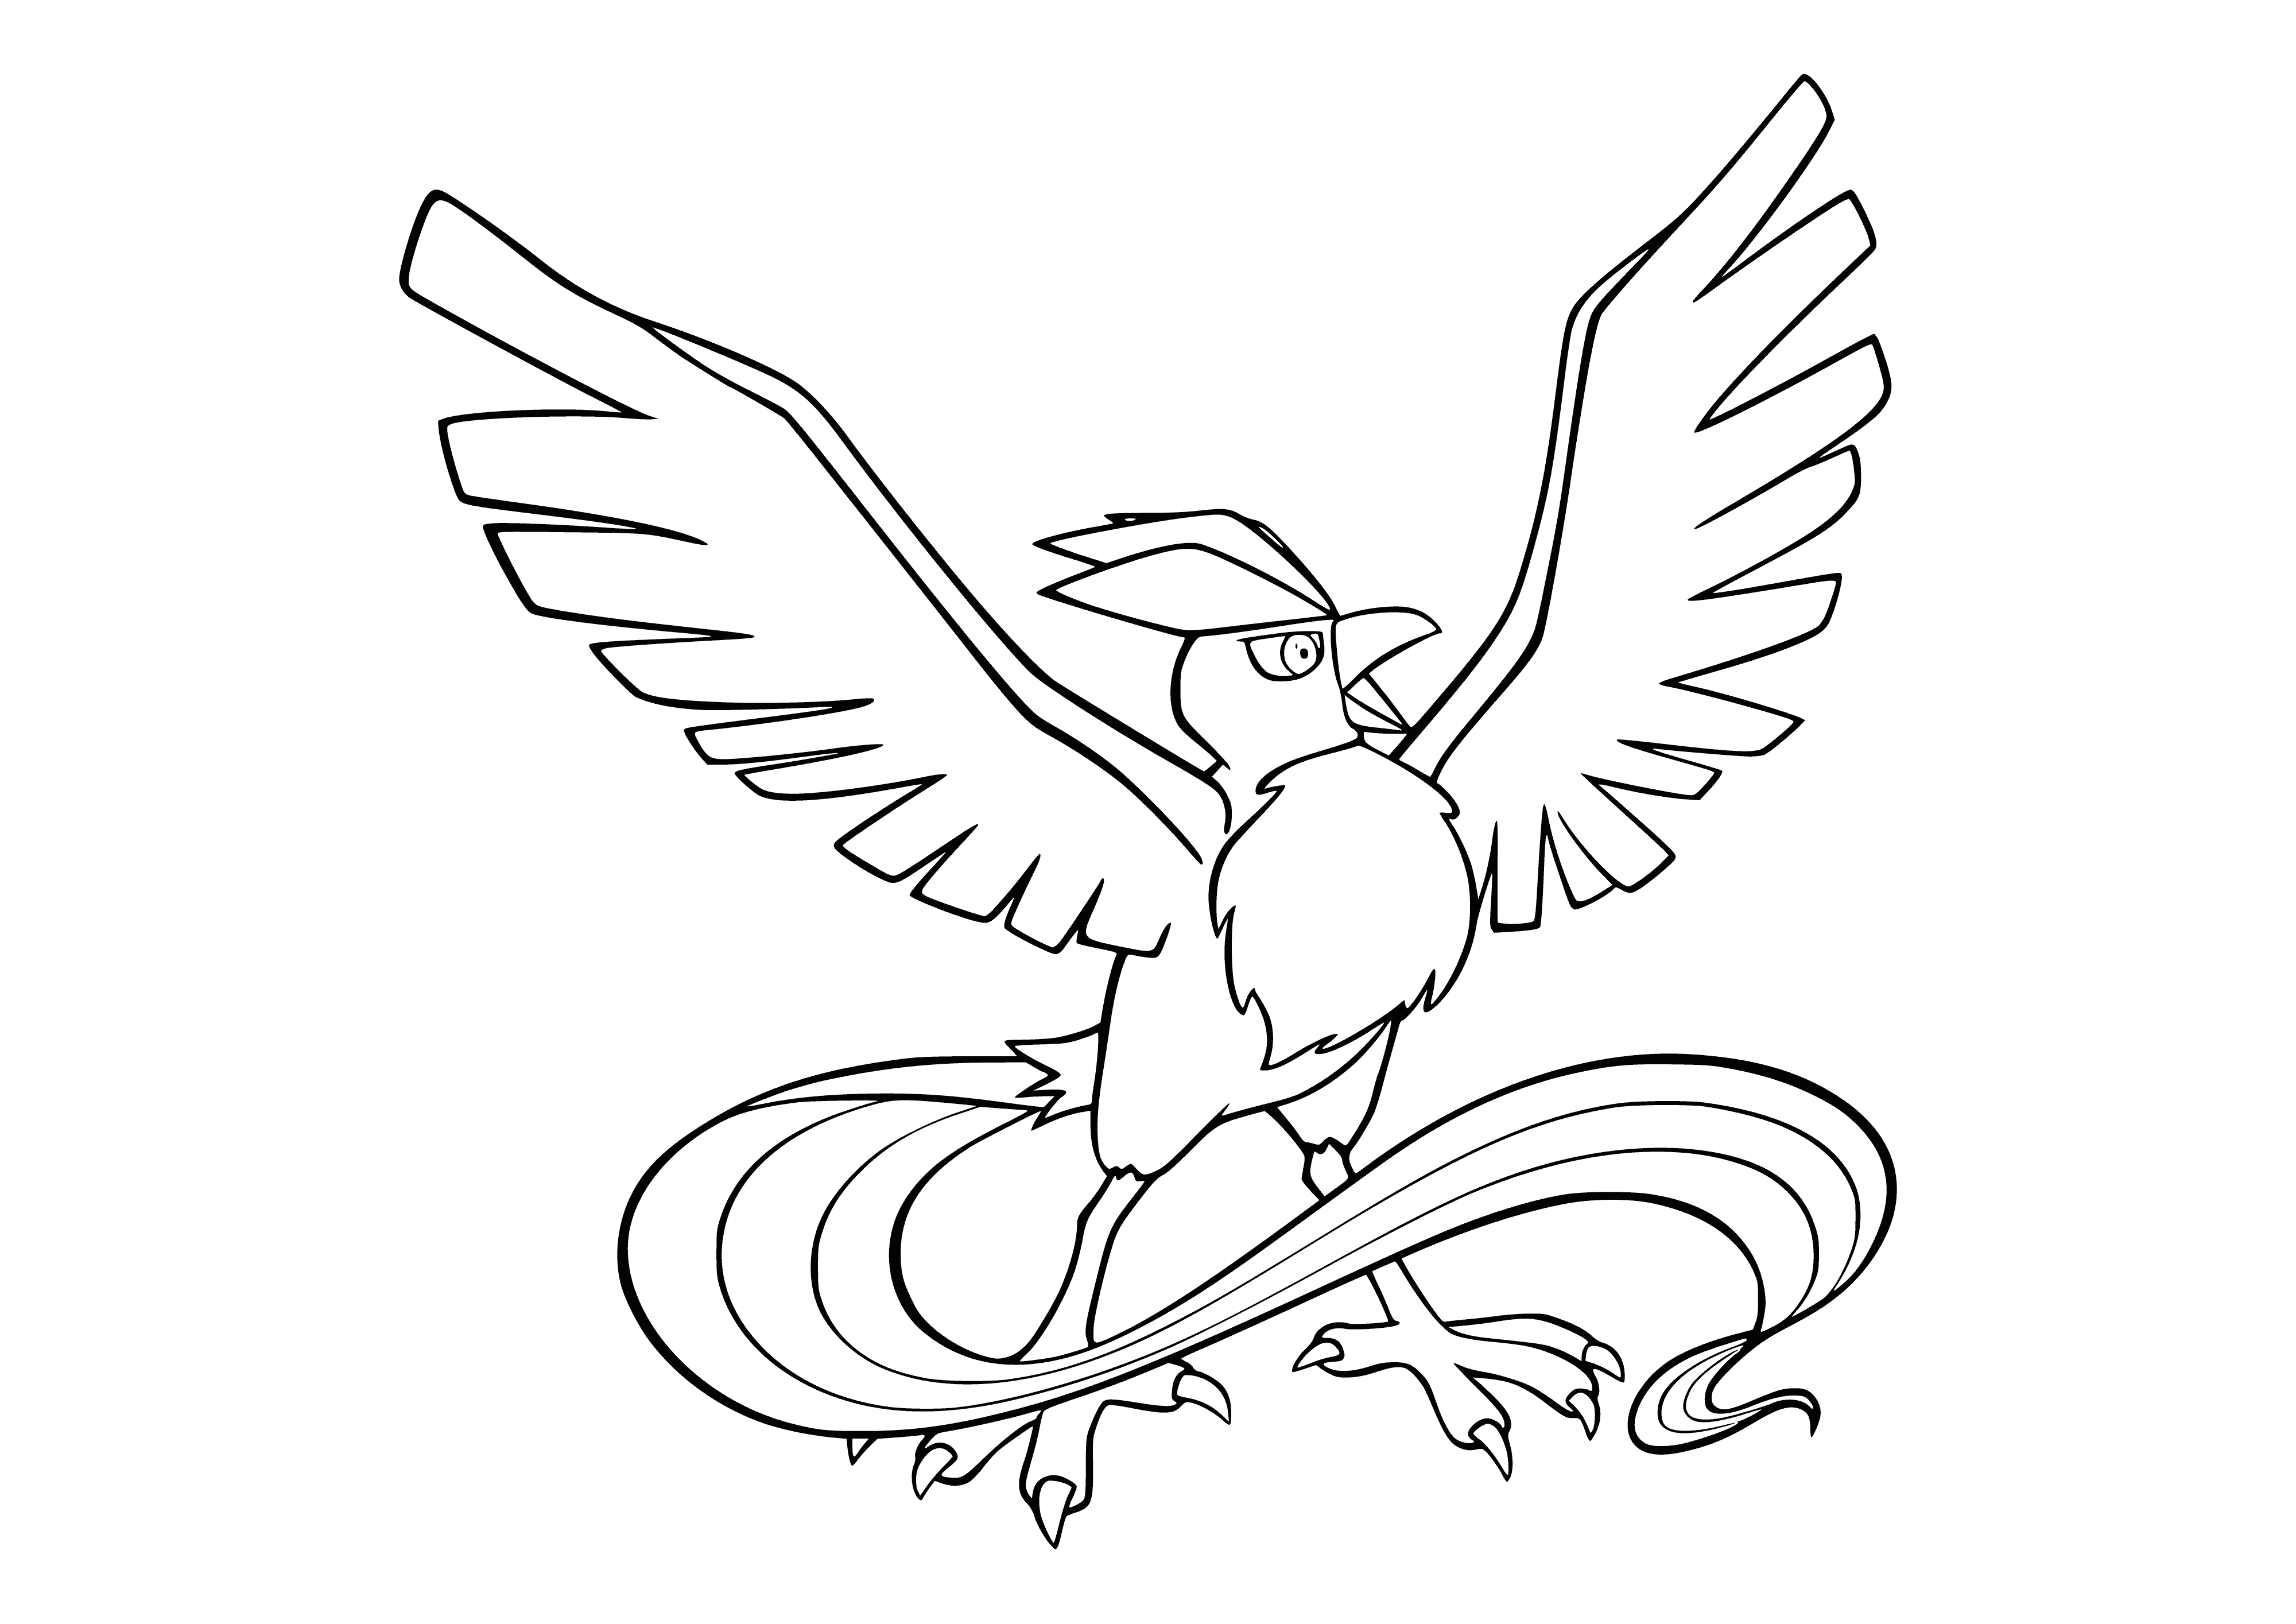 coloring page: Beautiful blue bird with white wings, tuft of feathers, white beak & feet, and long tail.